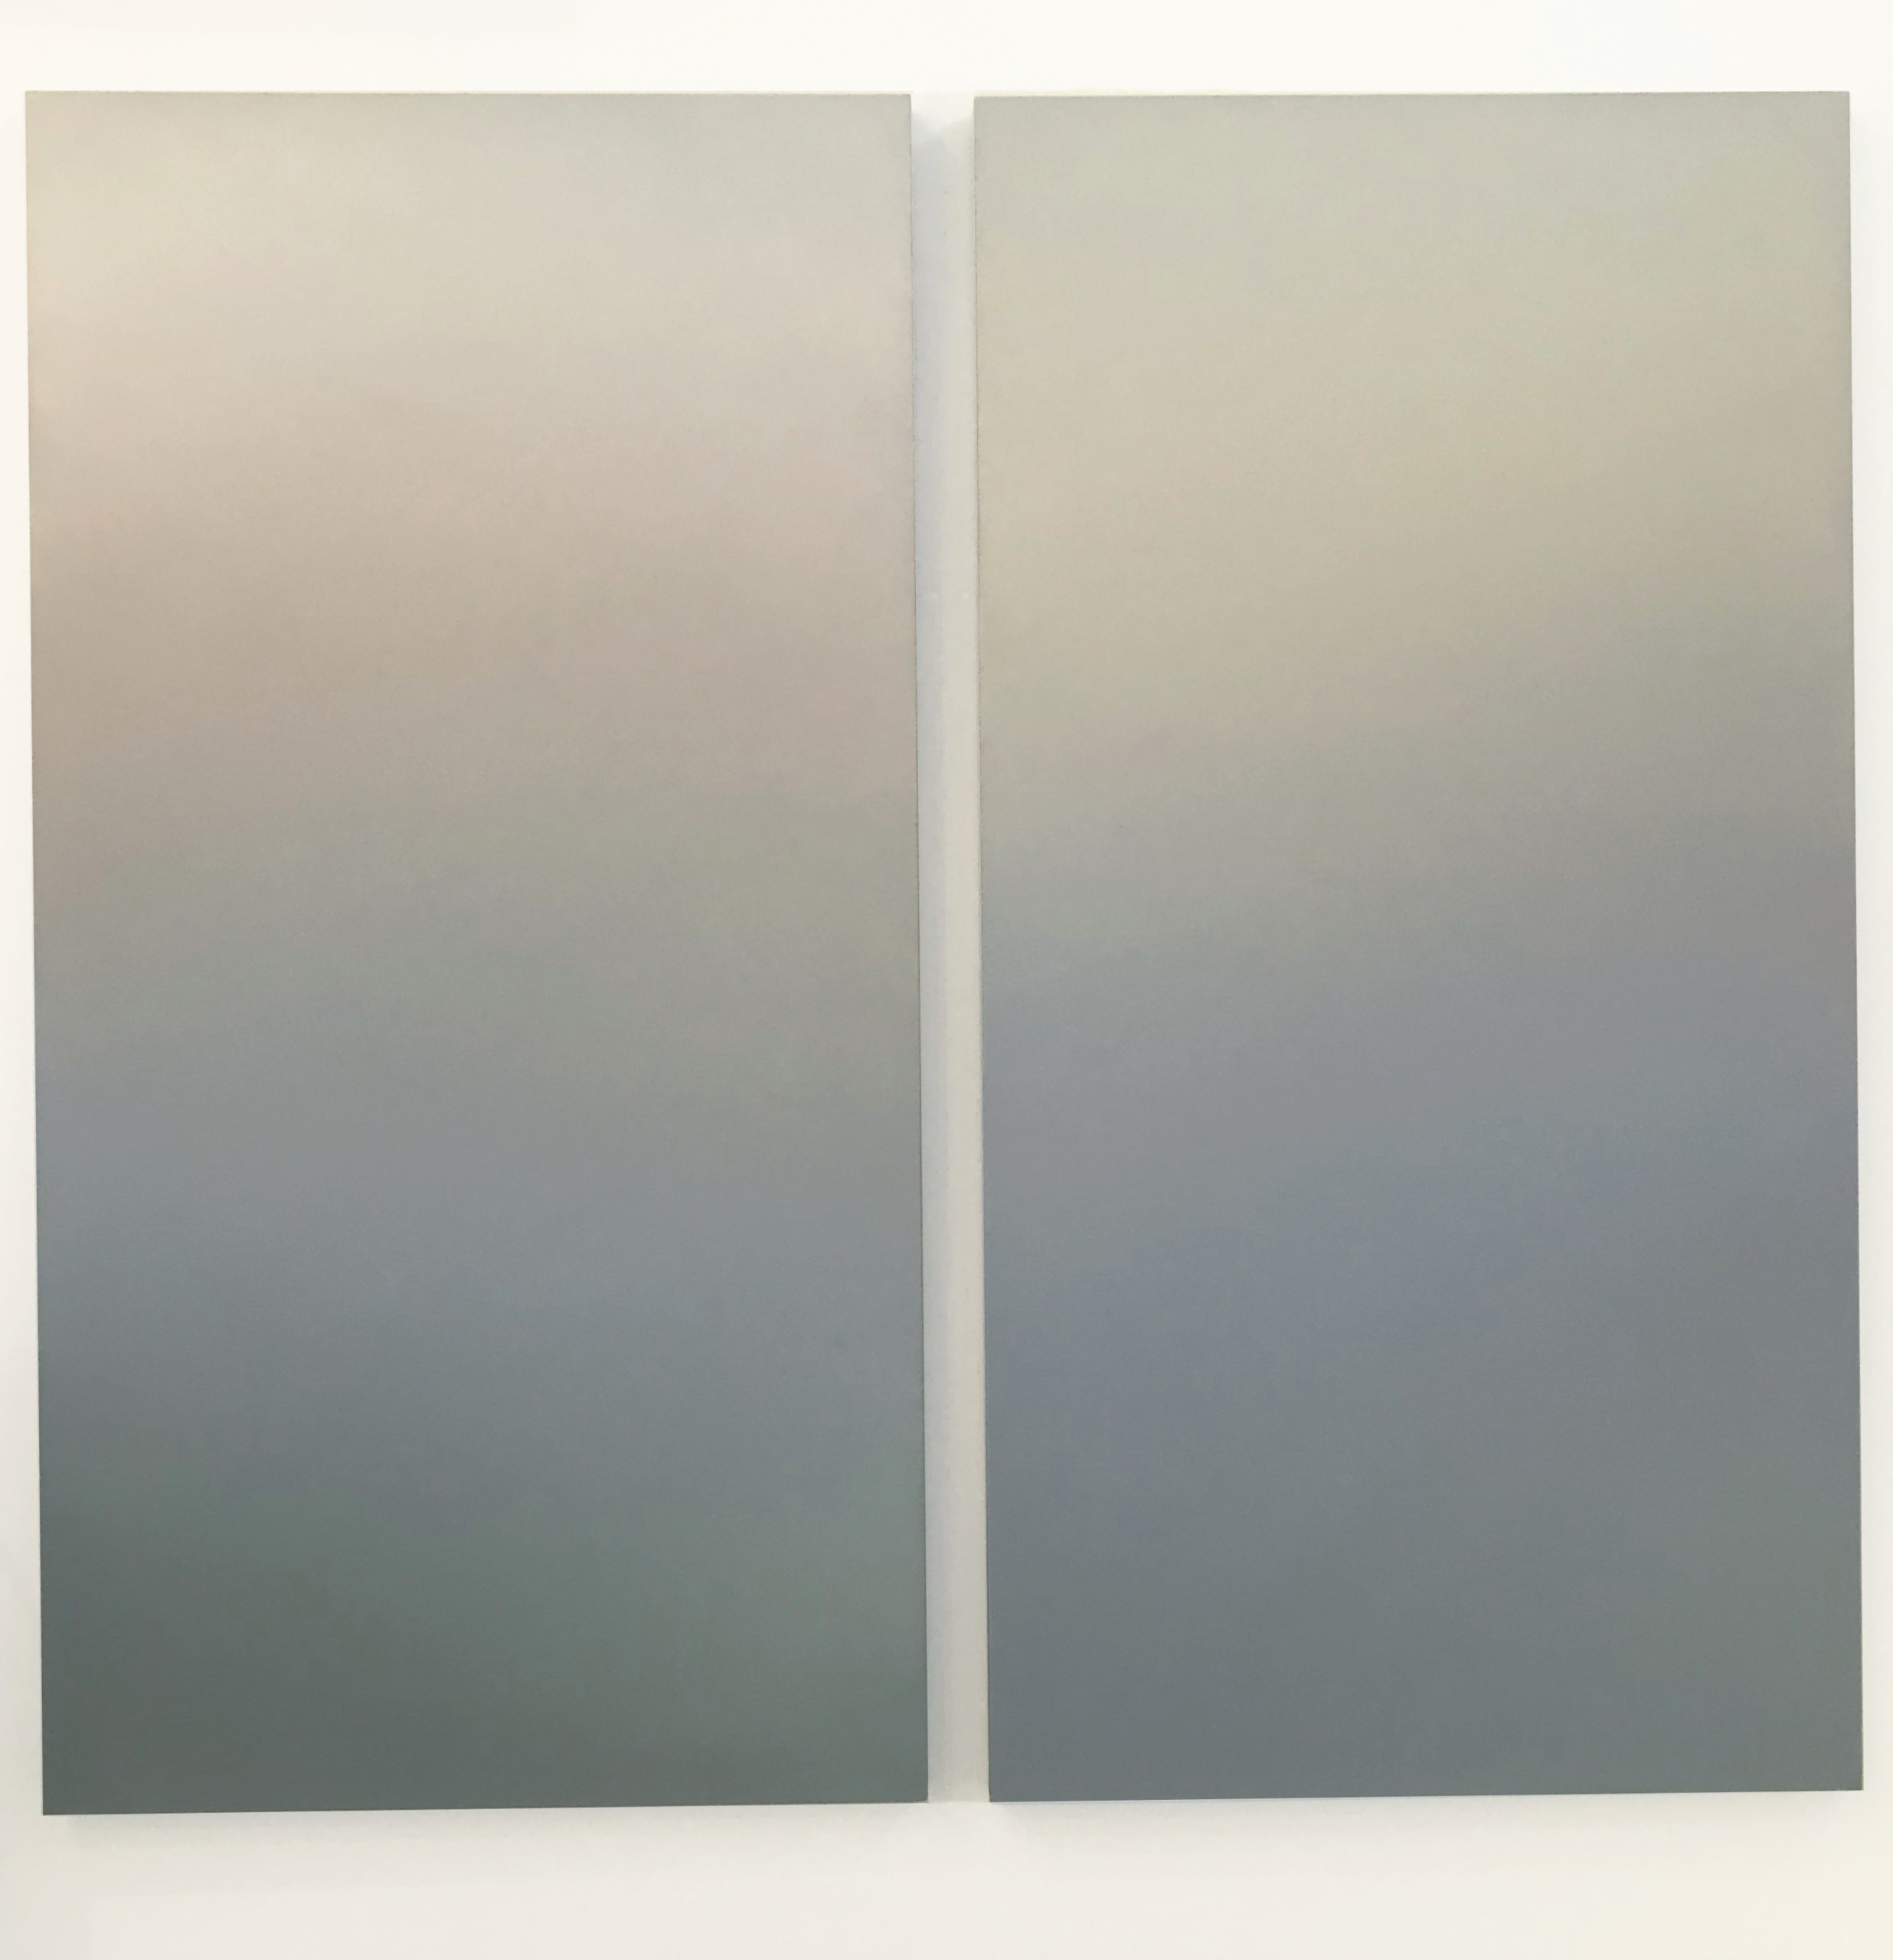 Mary Boochever “Inner Landscape Gamma,” 2021. Pigments and acrylic on canvas, diptych, 72” x 76 ¾” overall.